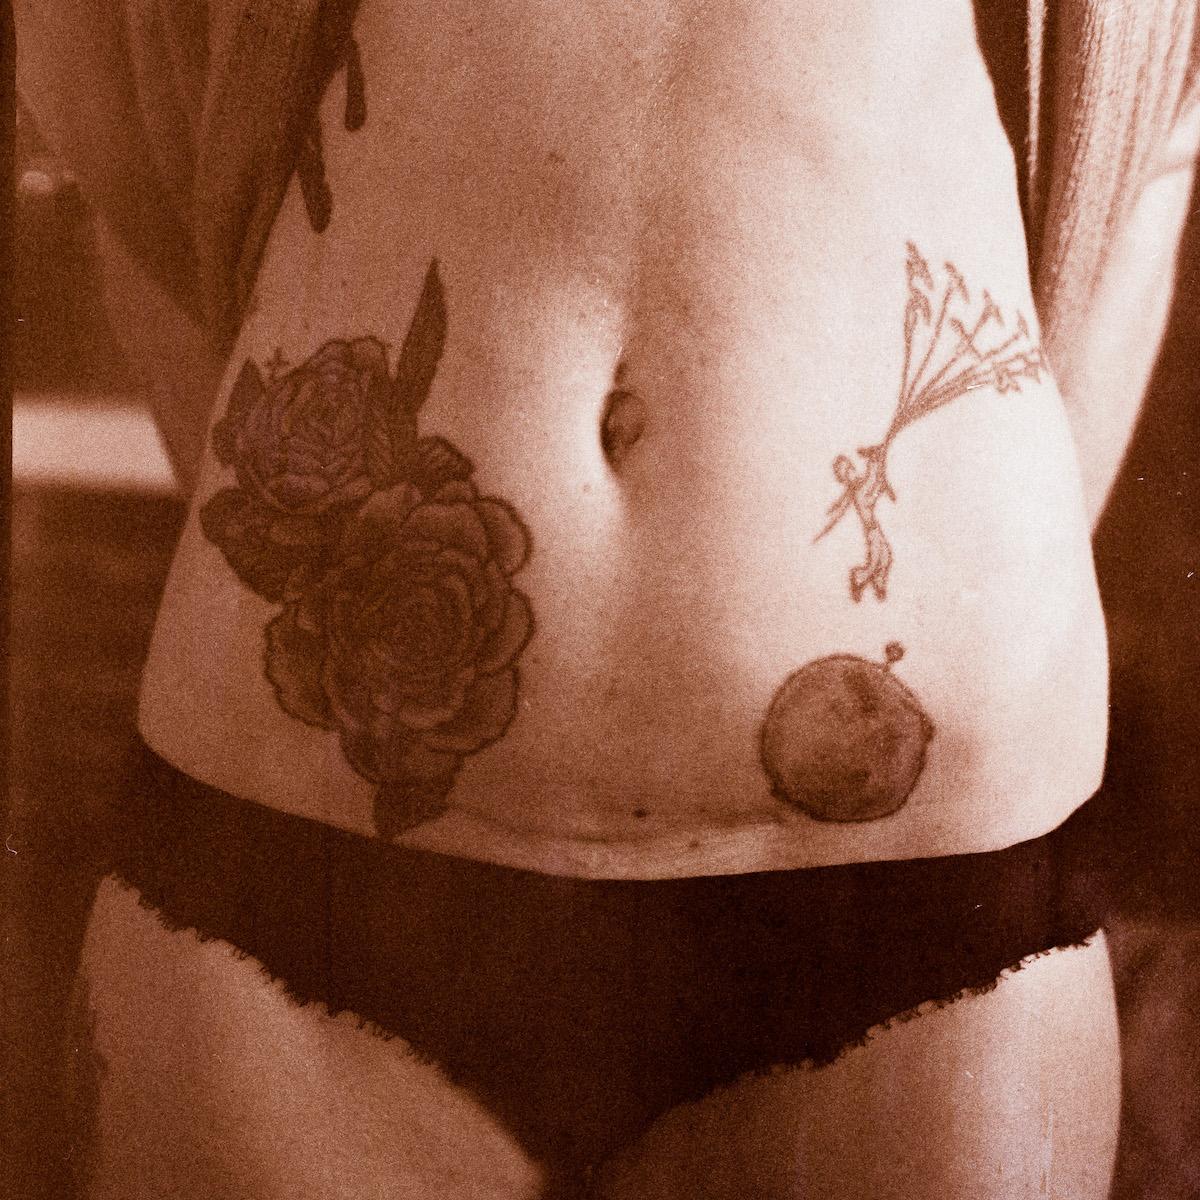 Sepia tinted closely framed photo of an abdomen with tattoos and a cesarian section scar. 